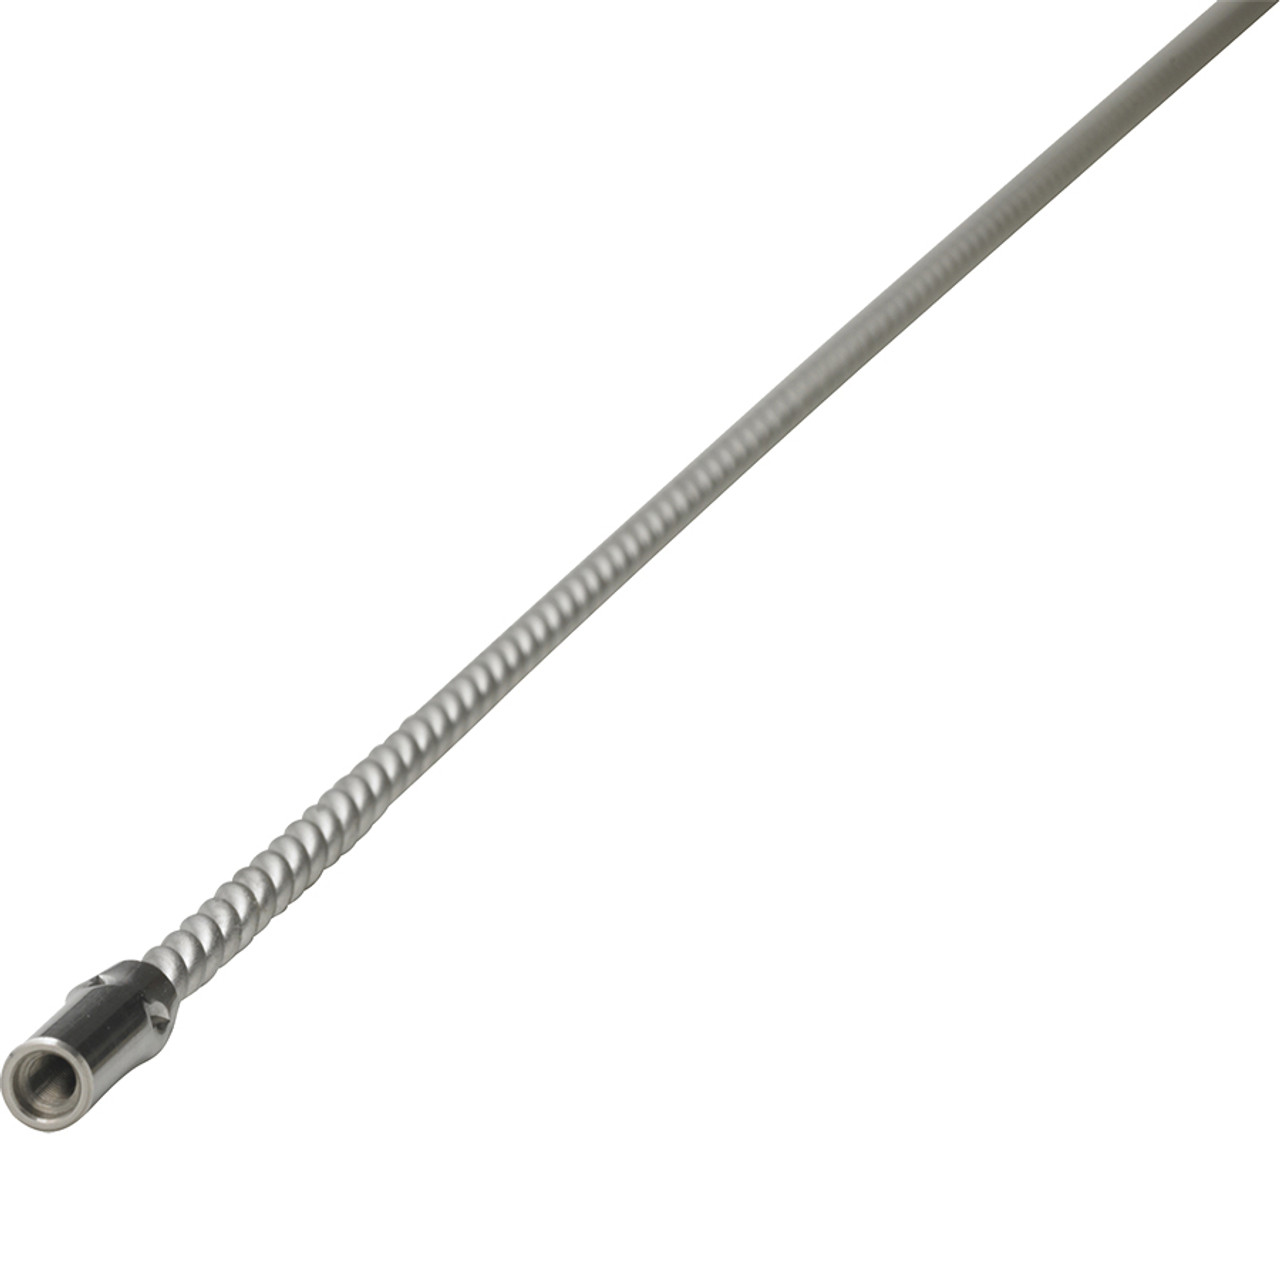 30.8 Flexible Stainless Steel Extension Rod